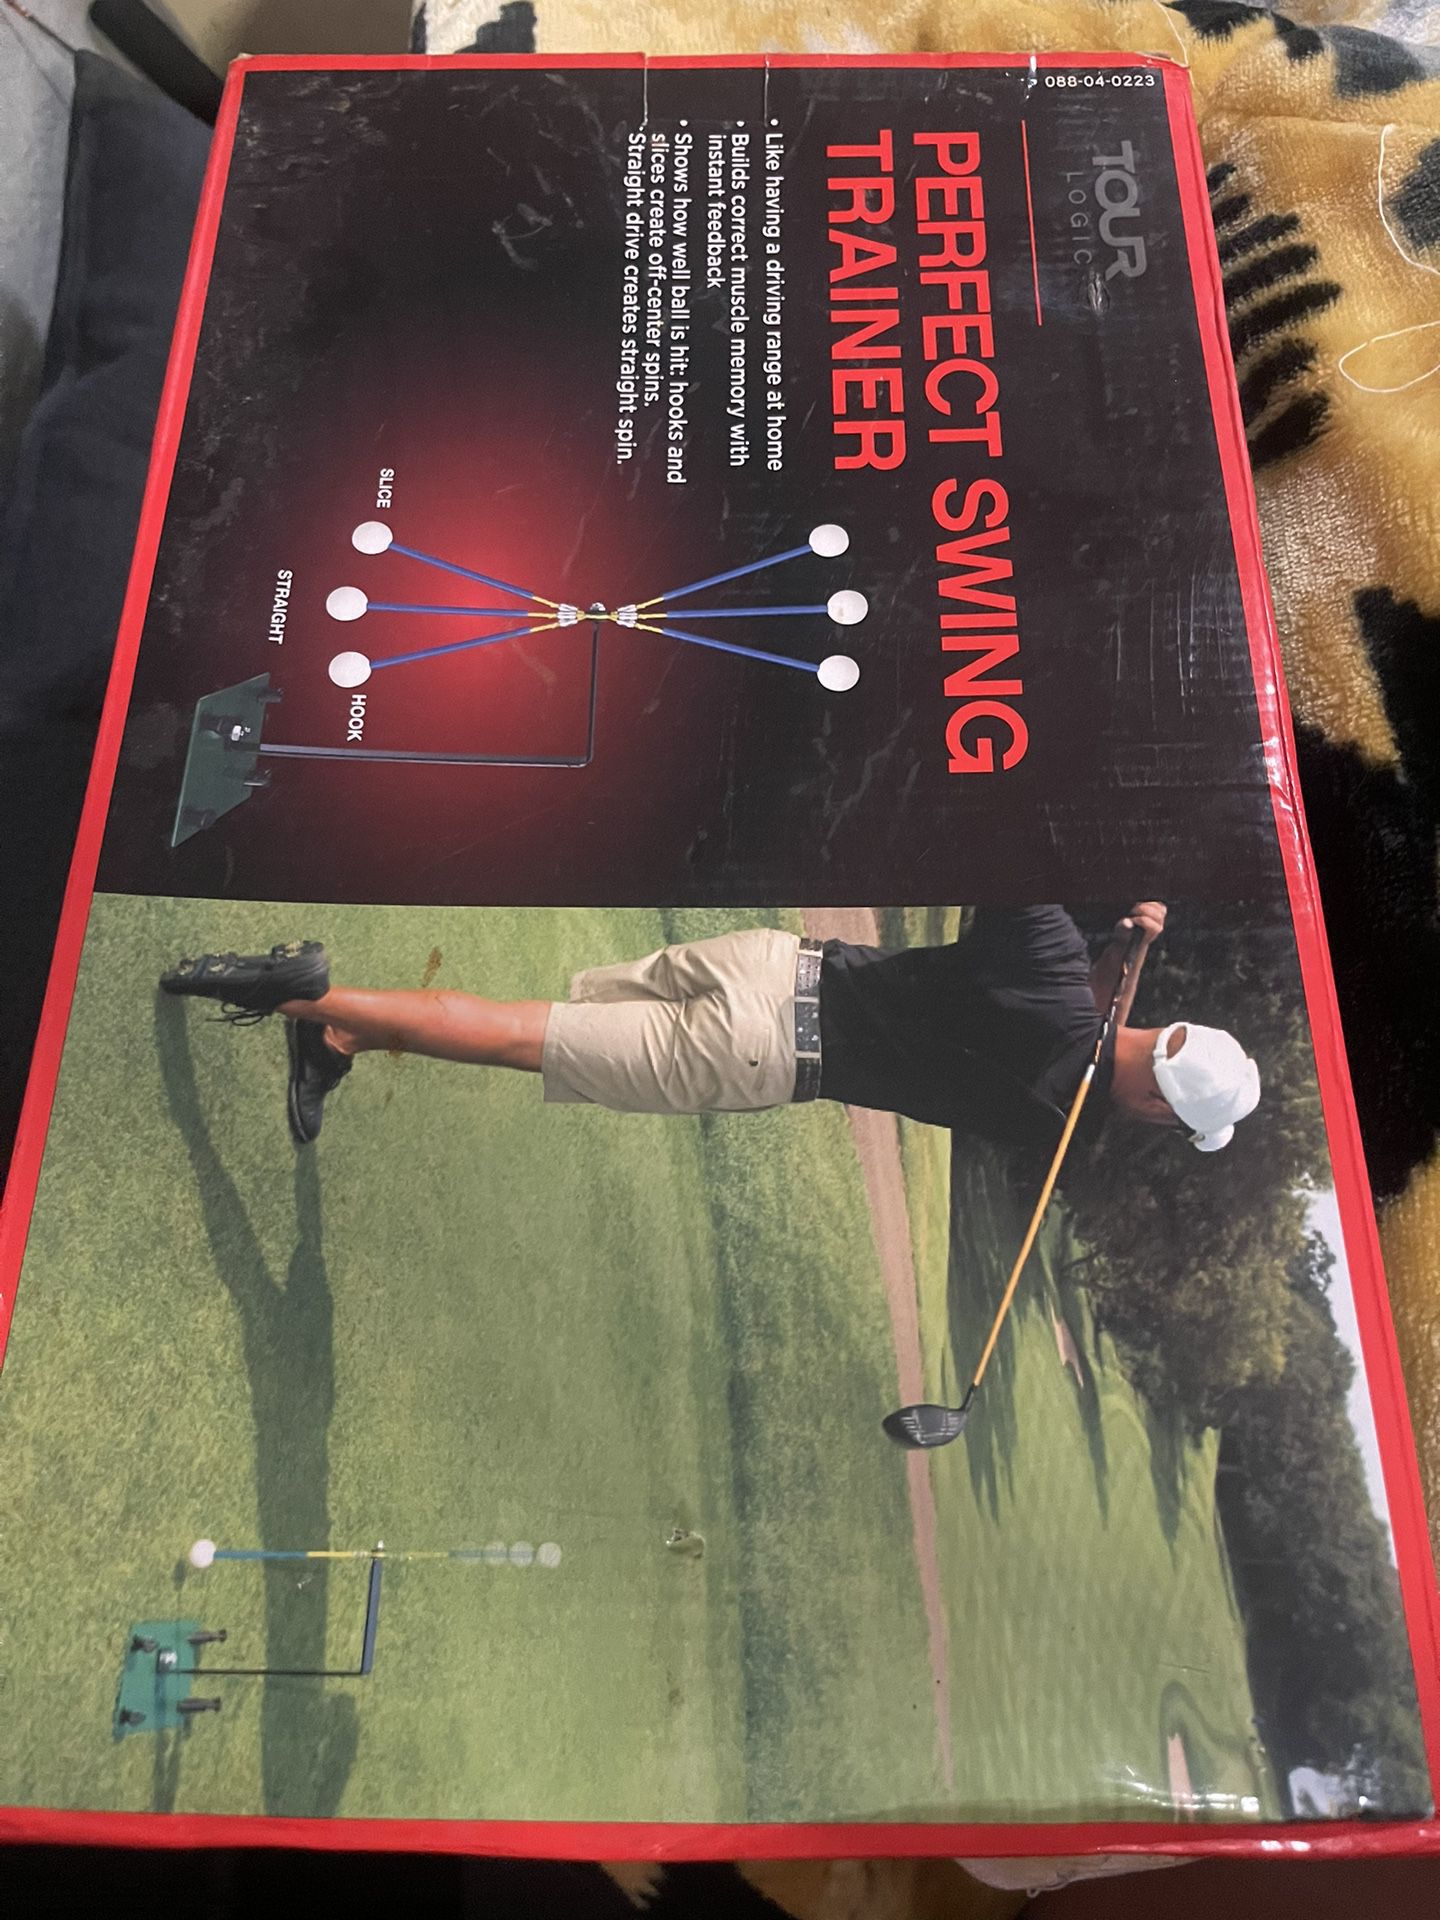 Perfect Swing Trainer 